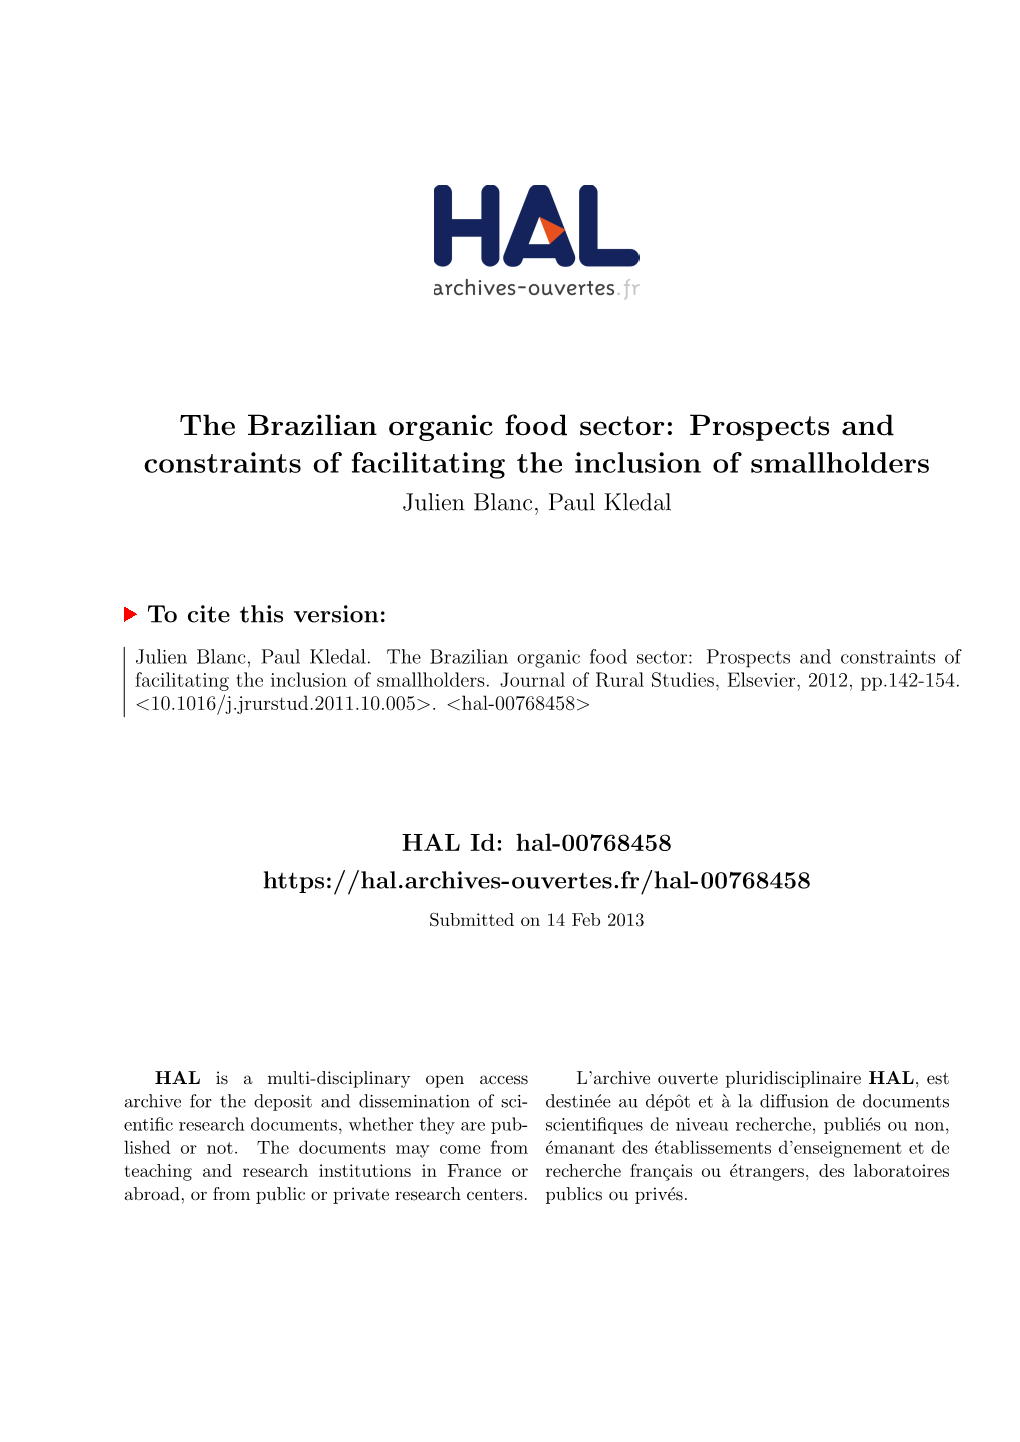 The Brazilian Organic Food Sector: Prospects and Constraints of Facilitating the Inclusion of Smallholders Julien Blanc, Paul Kledal